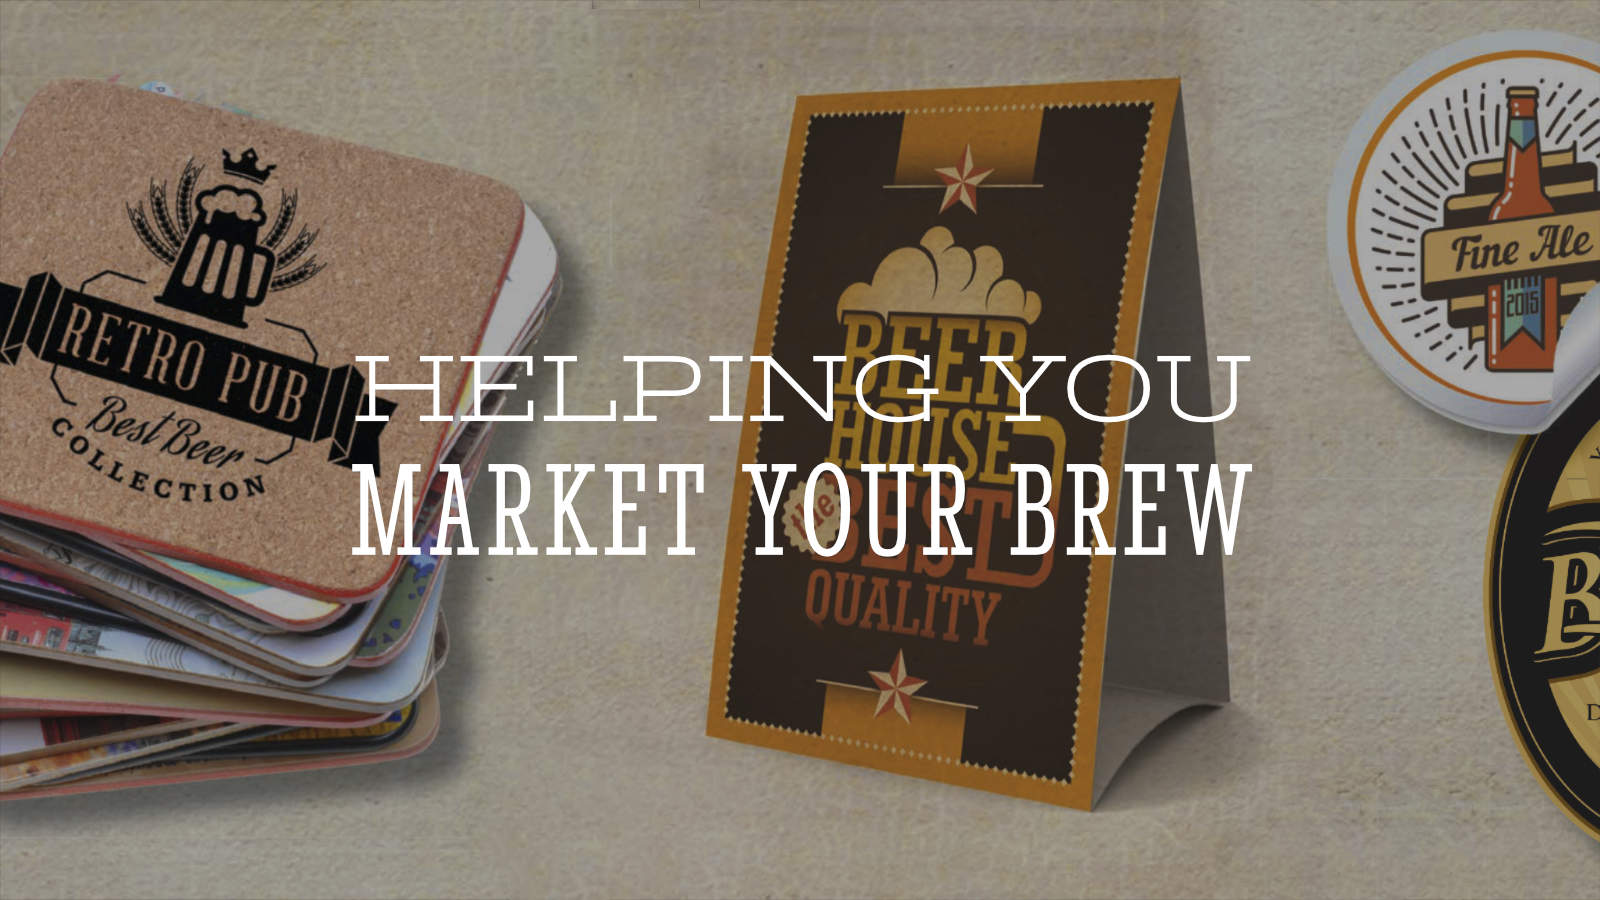 Helping you market your brew